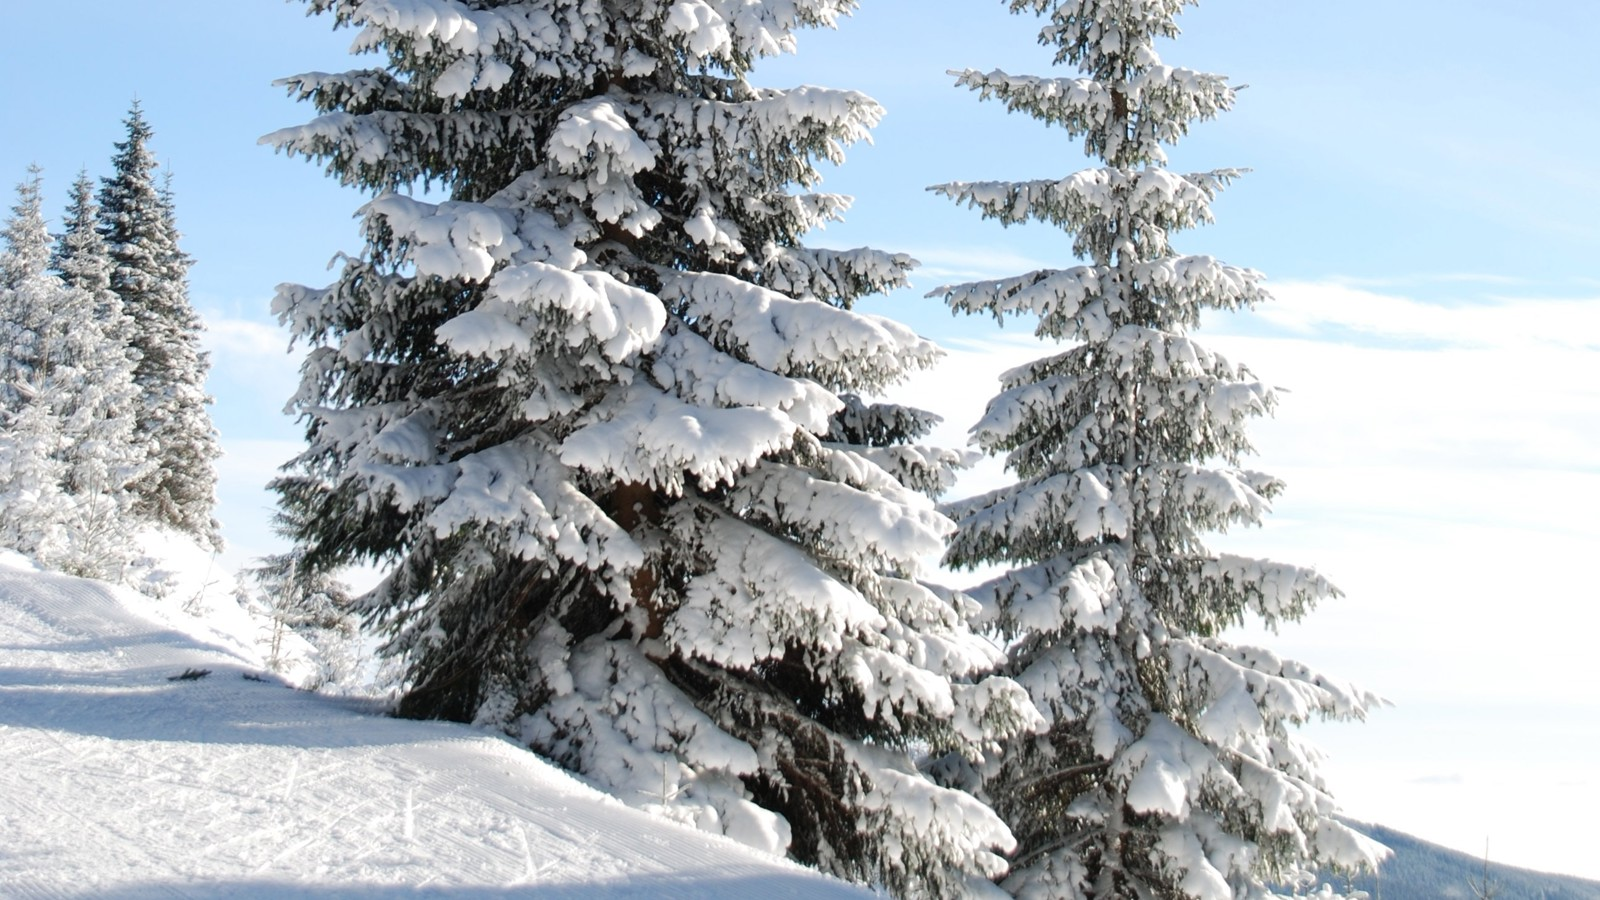 Two snow-covered fir trees on a ski slope